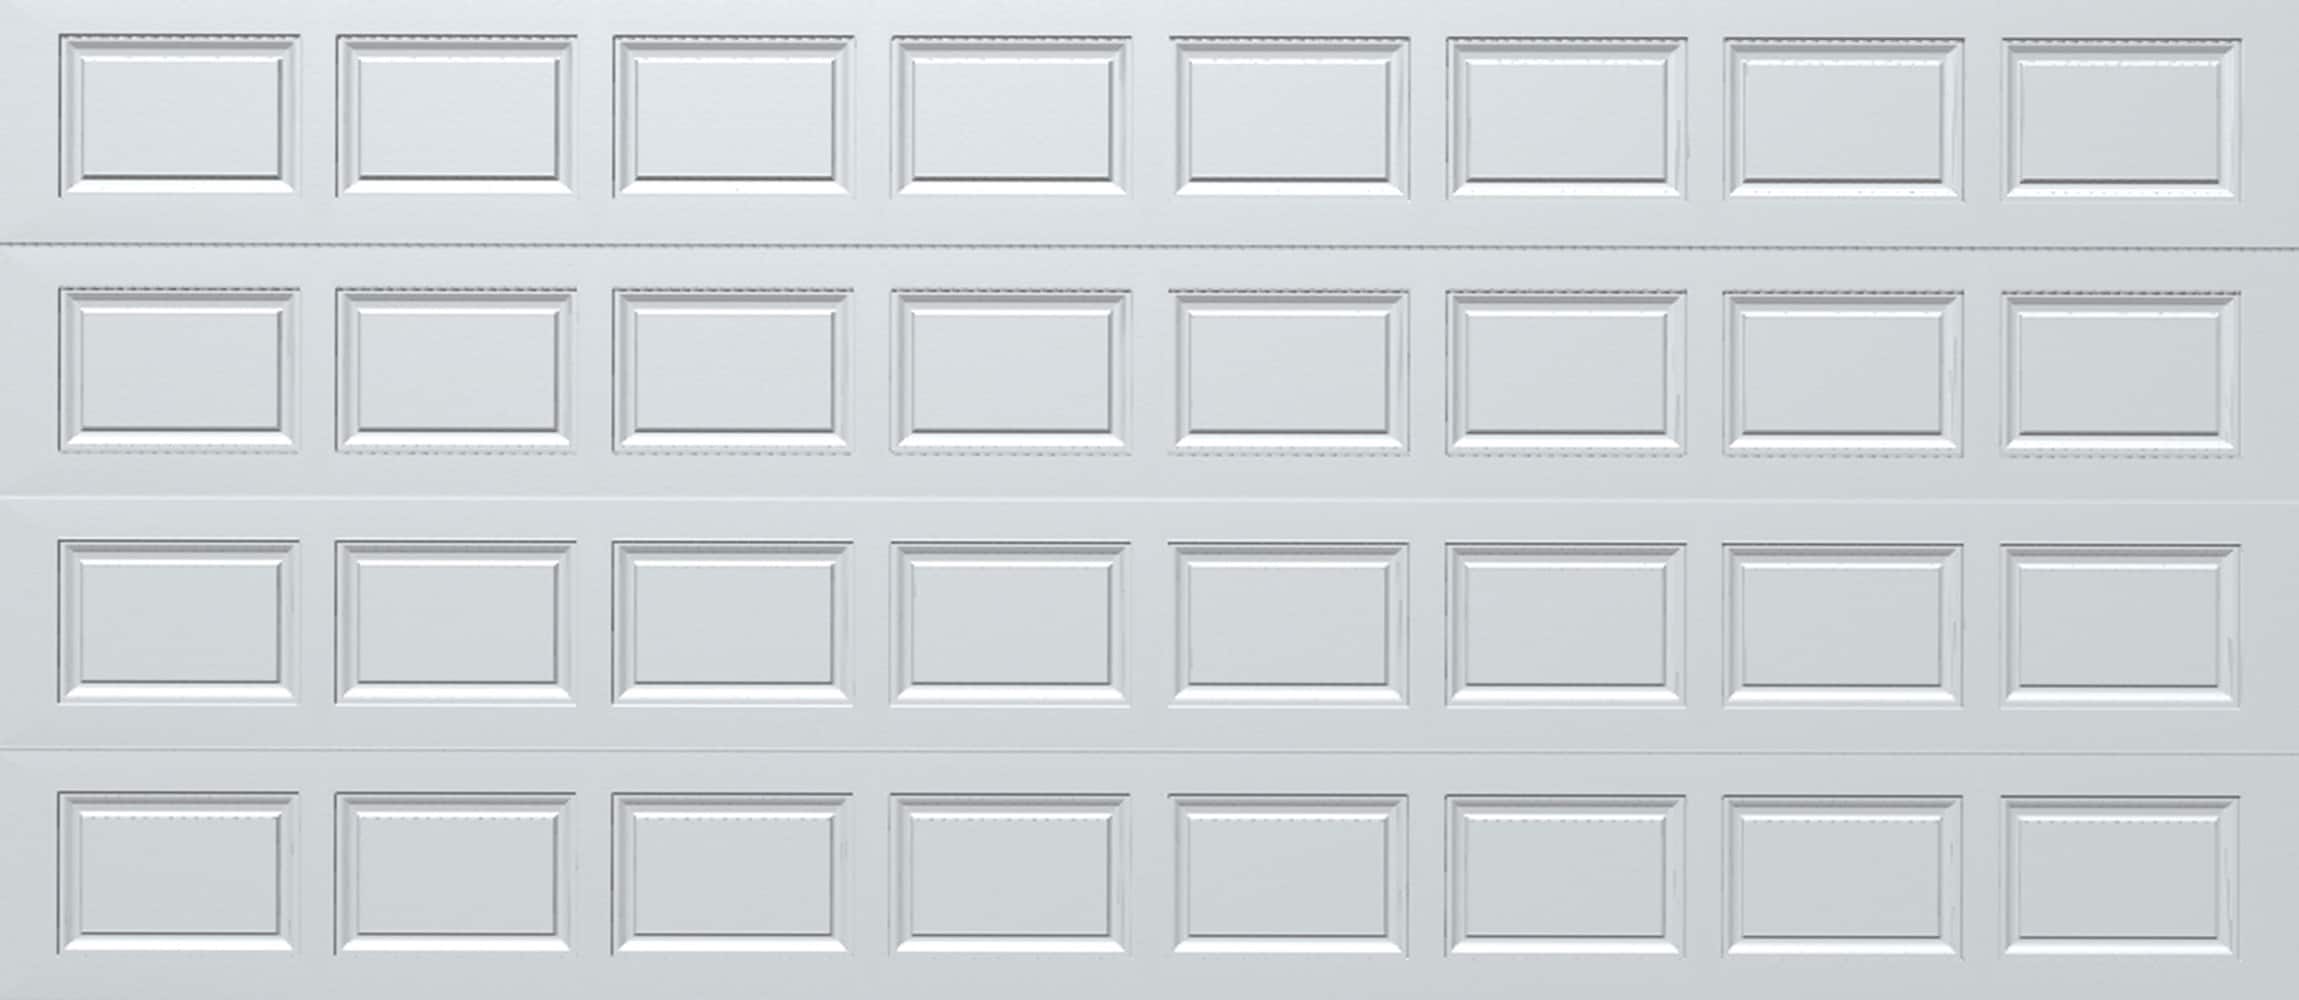 16 FT Wide By 8 FT Tall Full View Garage Door Matt Black Finish With C